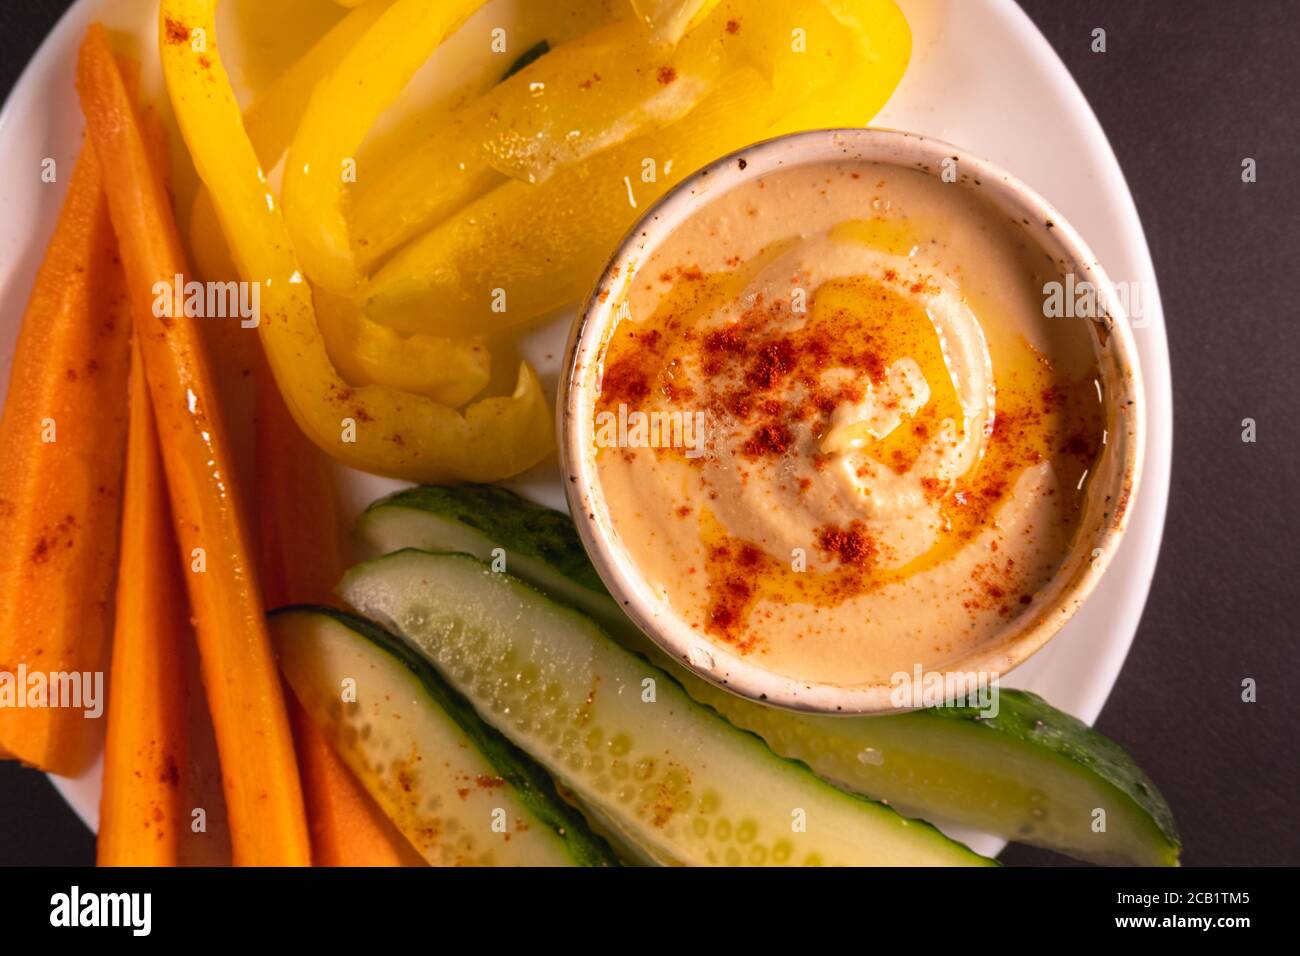 Hummus dip and vegetables on a plate, top view with copy space. Healthy vegan meal or appetizer, plant based and vitamin rich food Stock Photo